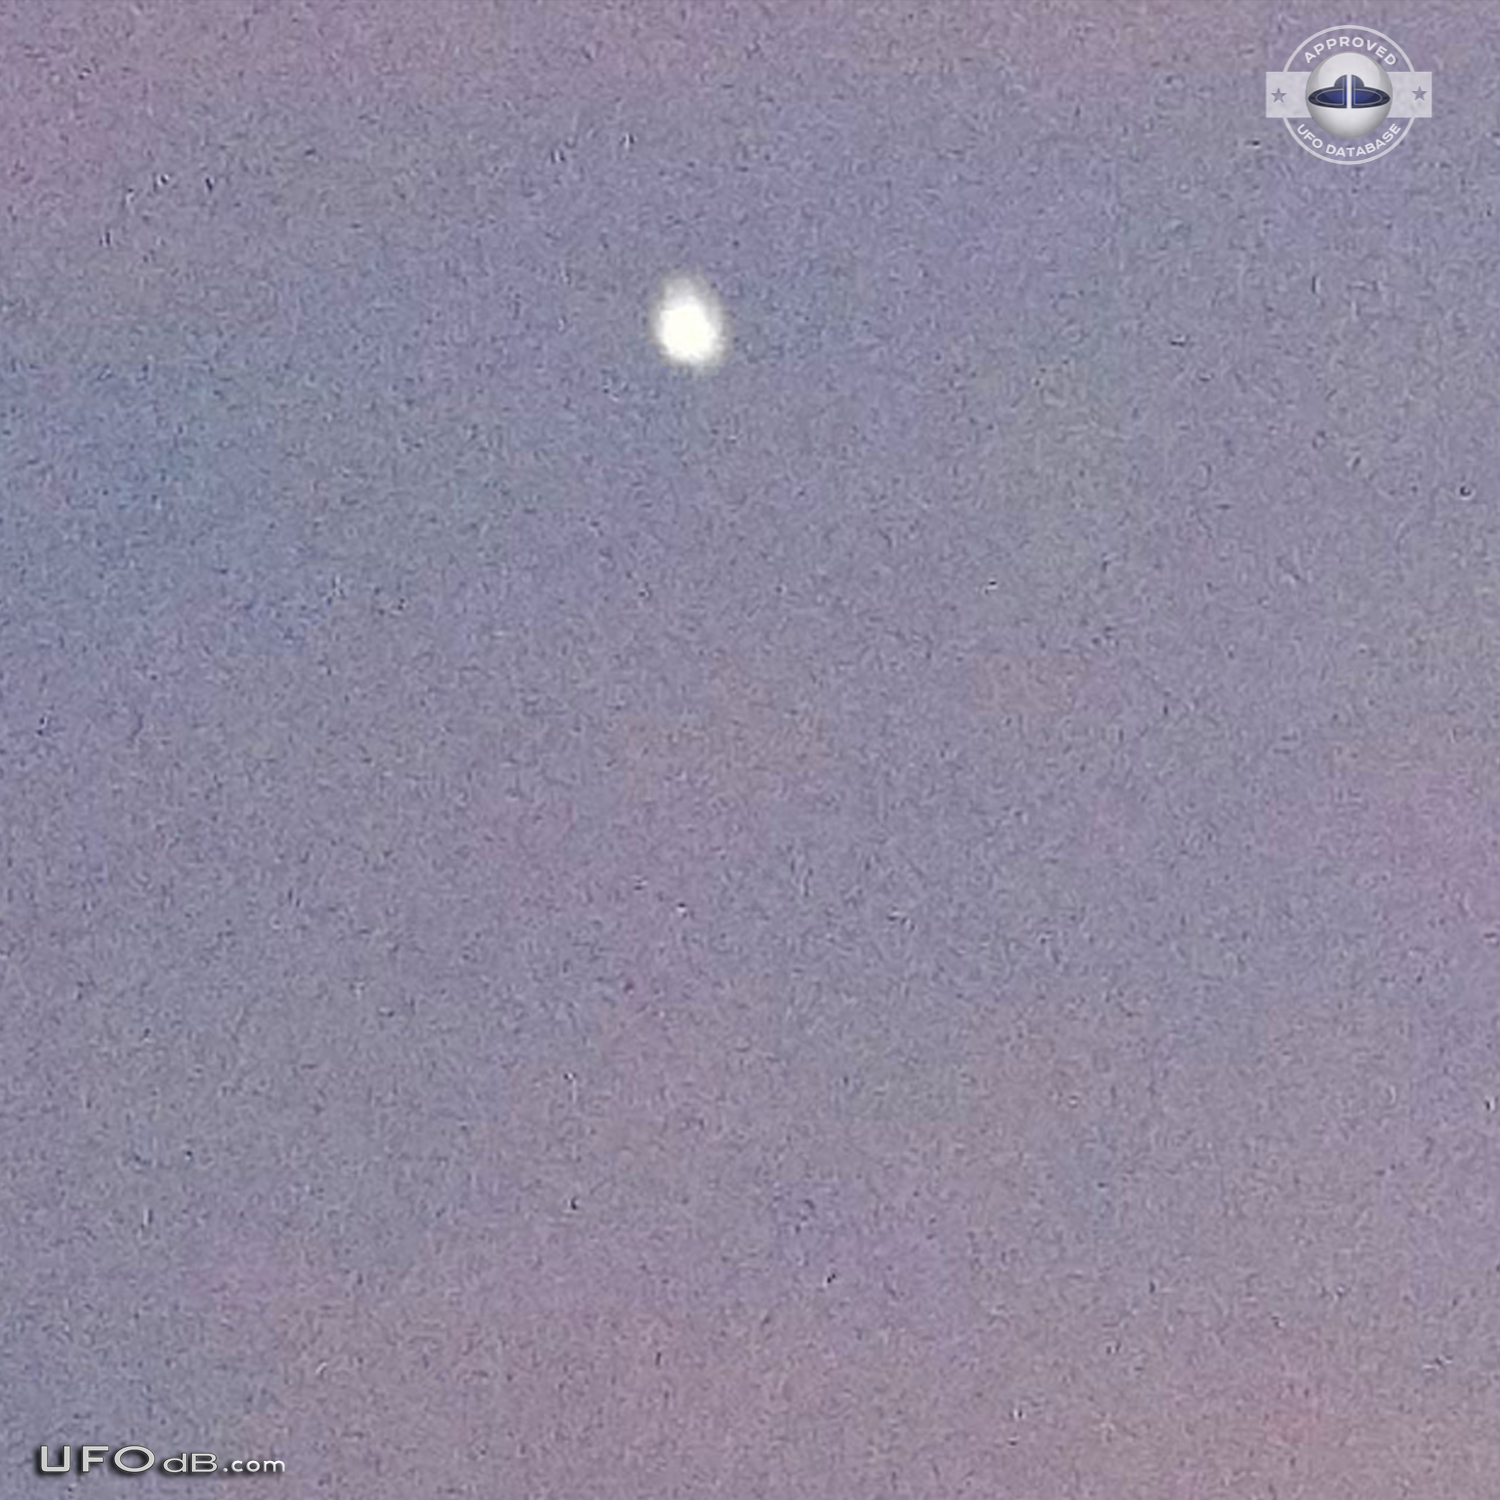 White fluffy Orb UFO caught on photo in the sky of Butte, Montana 2012 UFO Picture #517-2